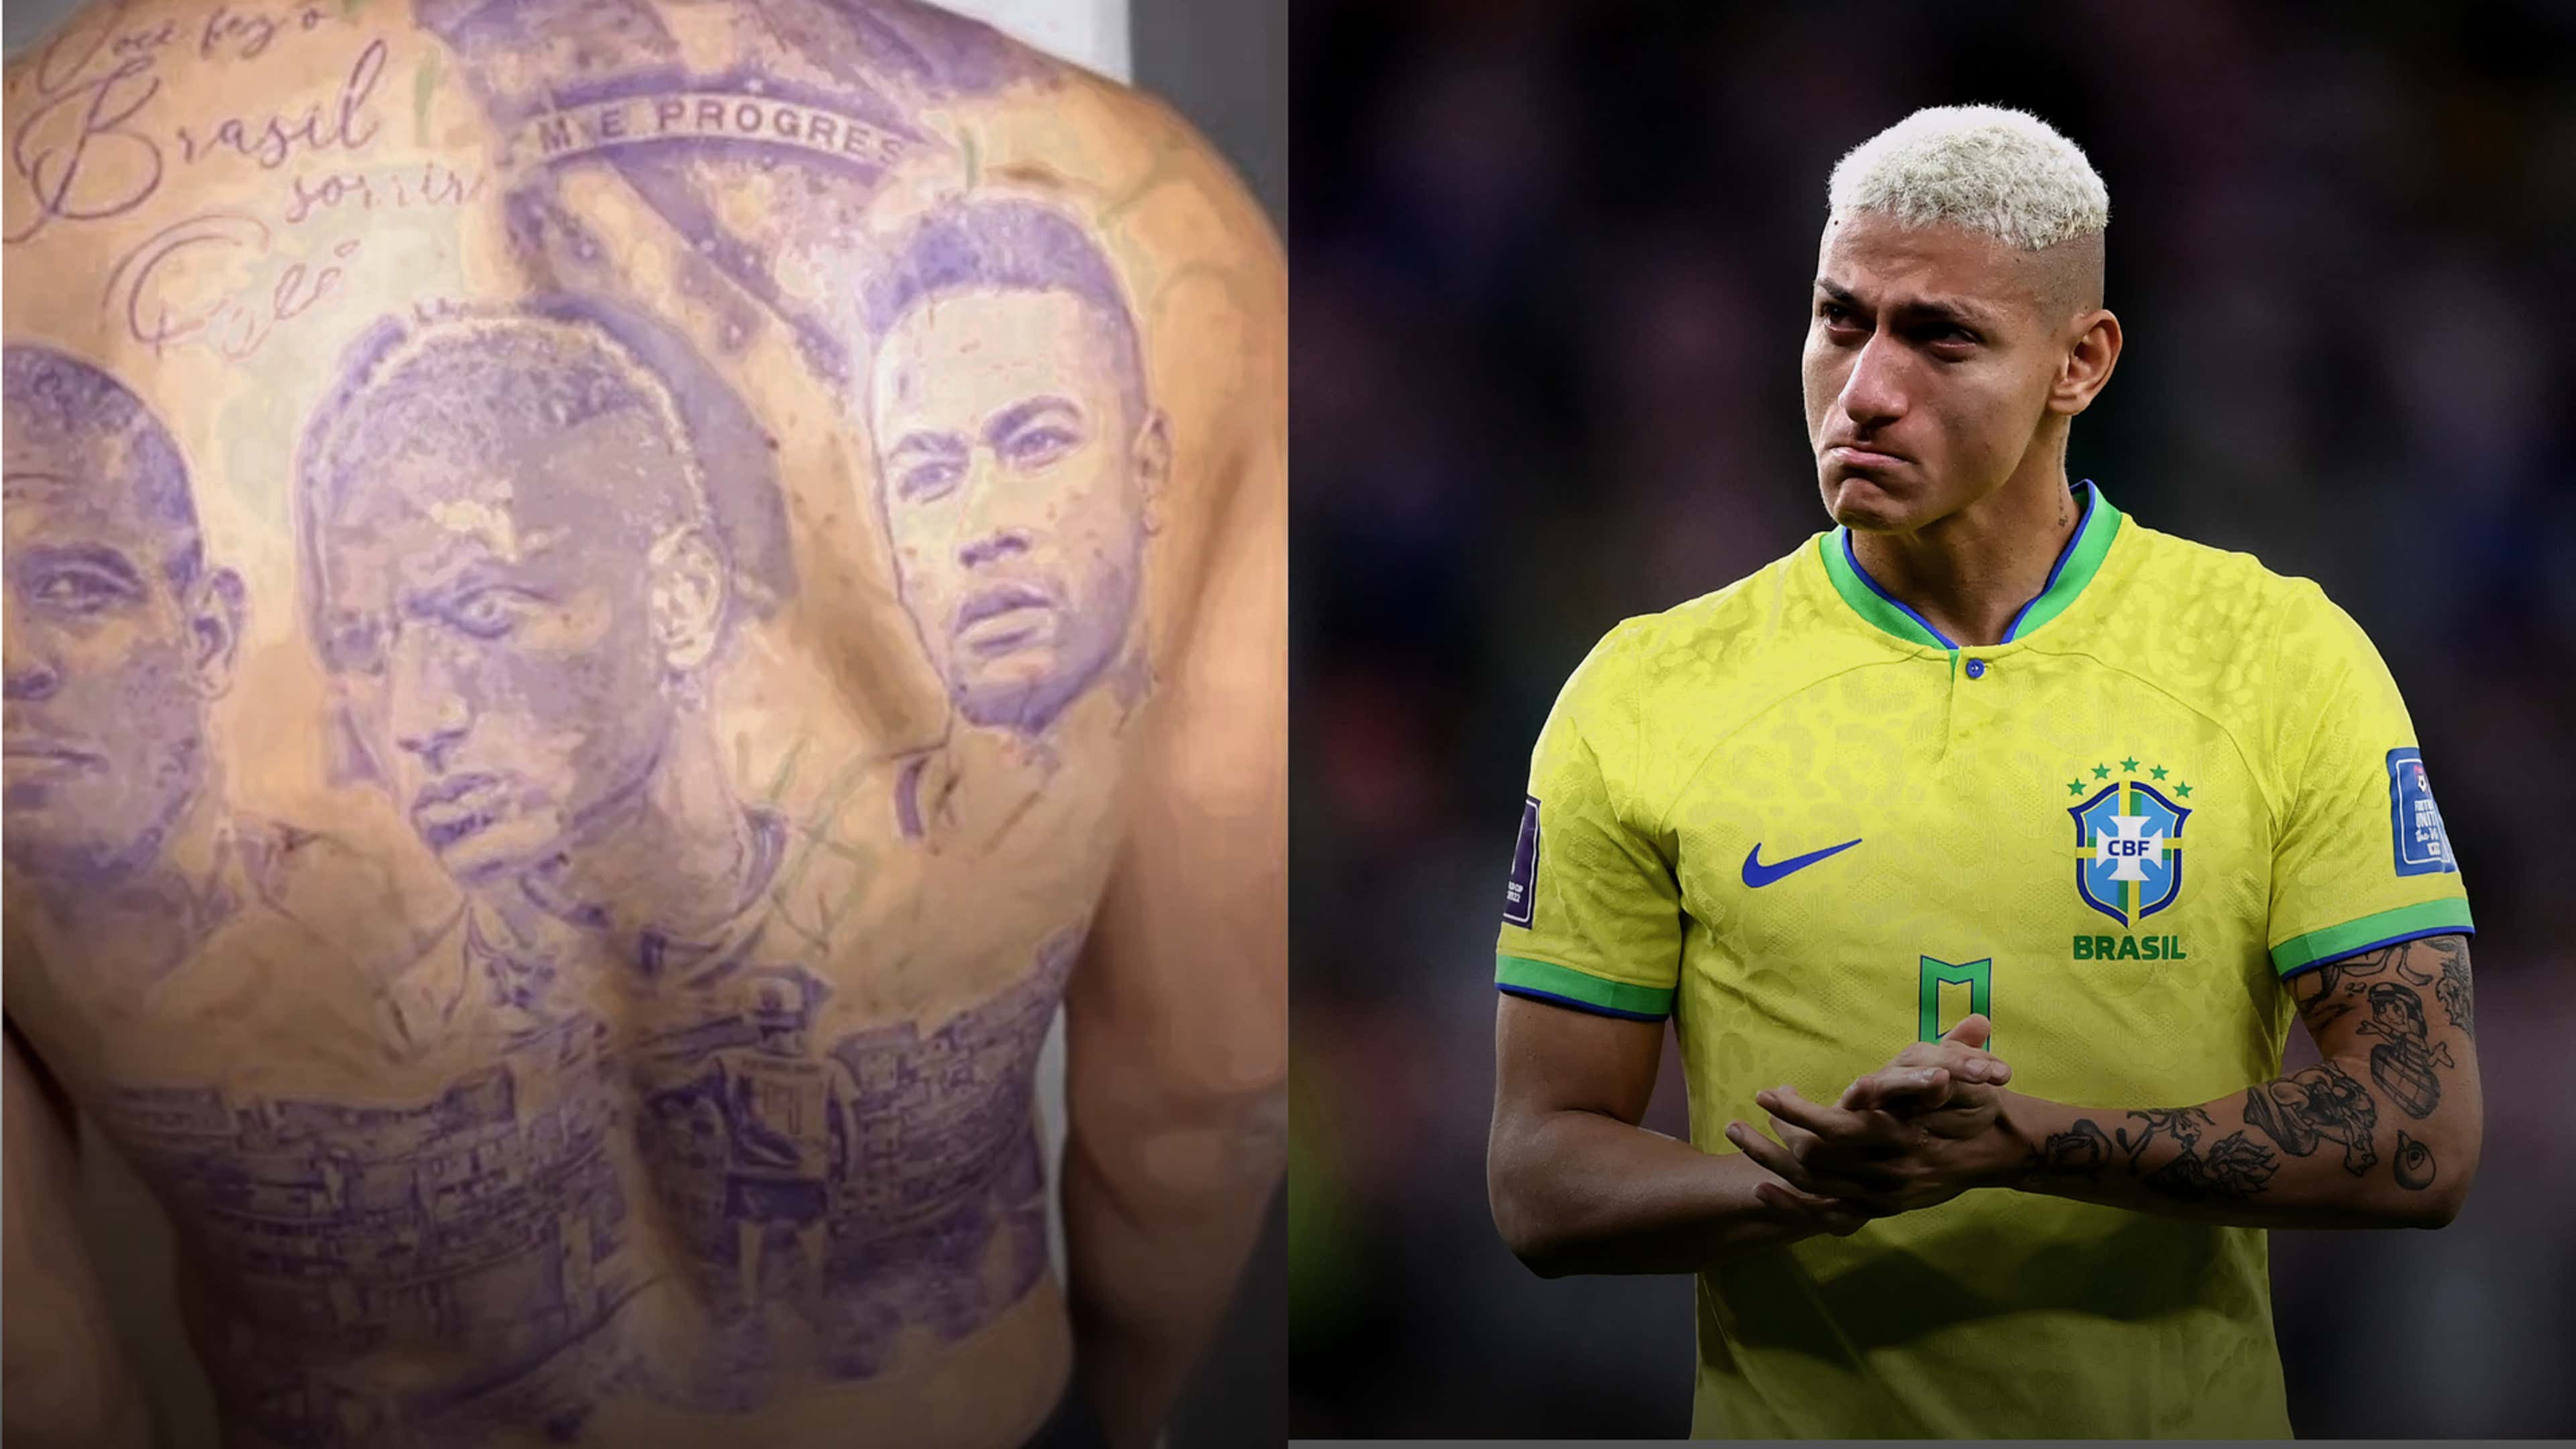 15 of the Best Tattoos in International Soccer